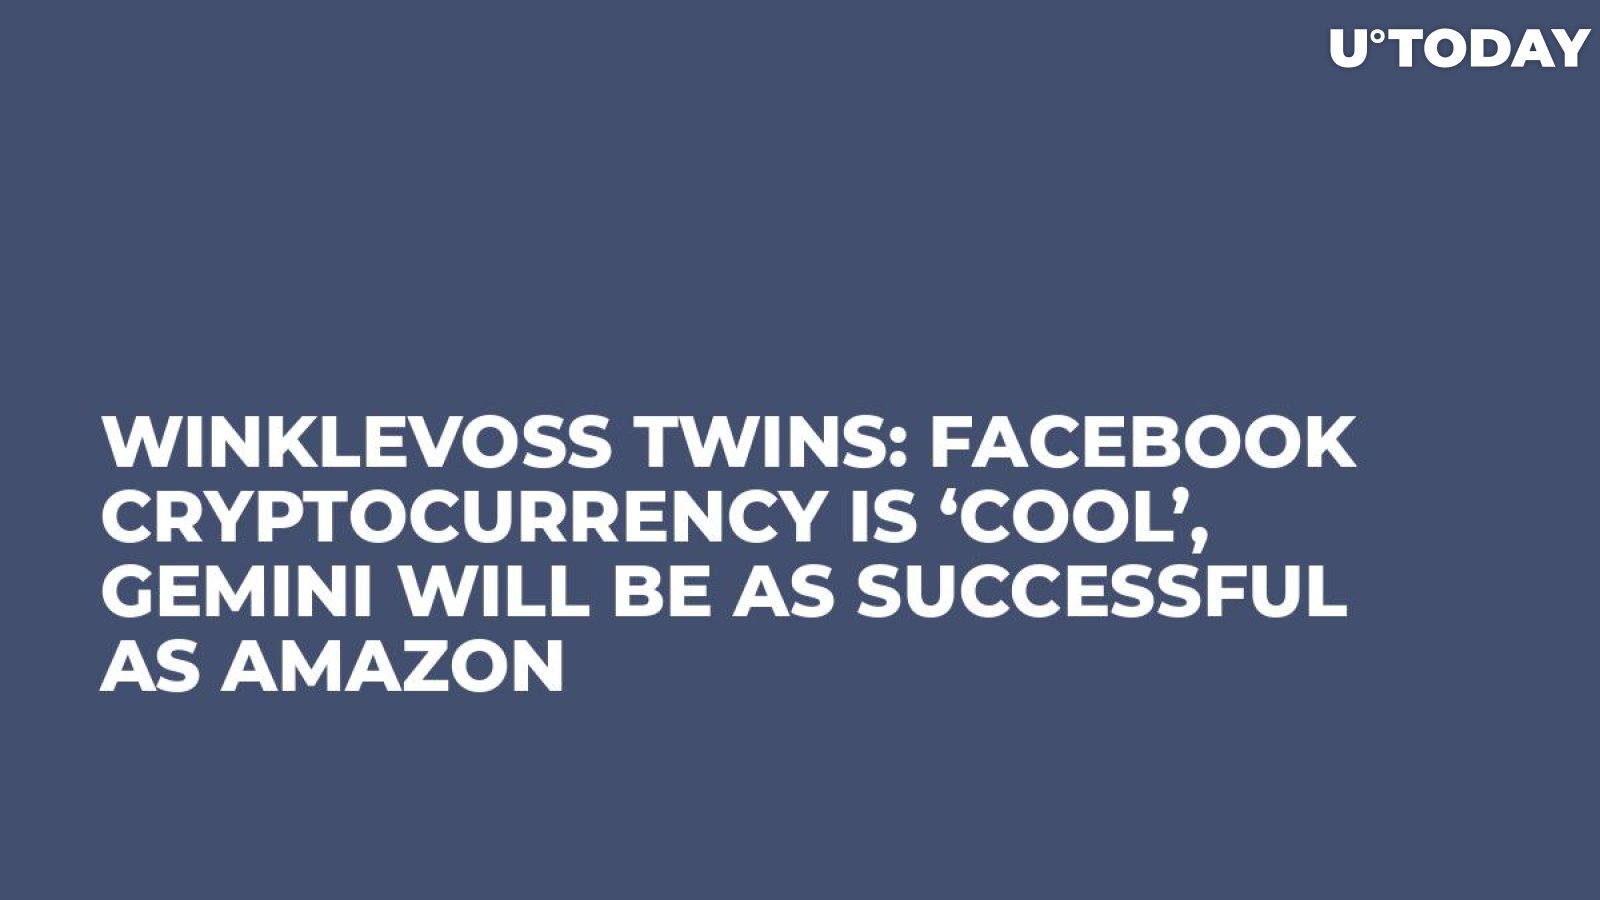 Winklevoss Twins: Facebook Cryptocurrency Is ‘Cool’, Gemini Will Be as Successful as Amazon